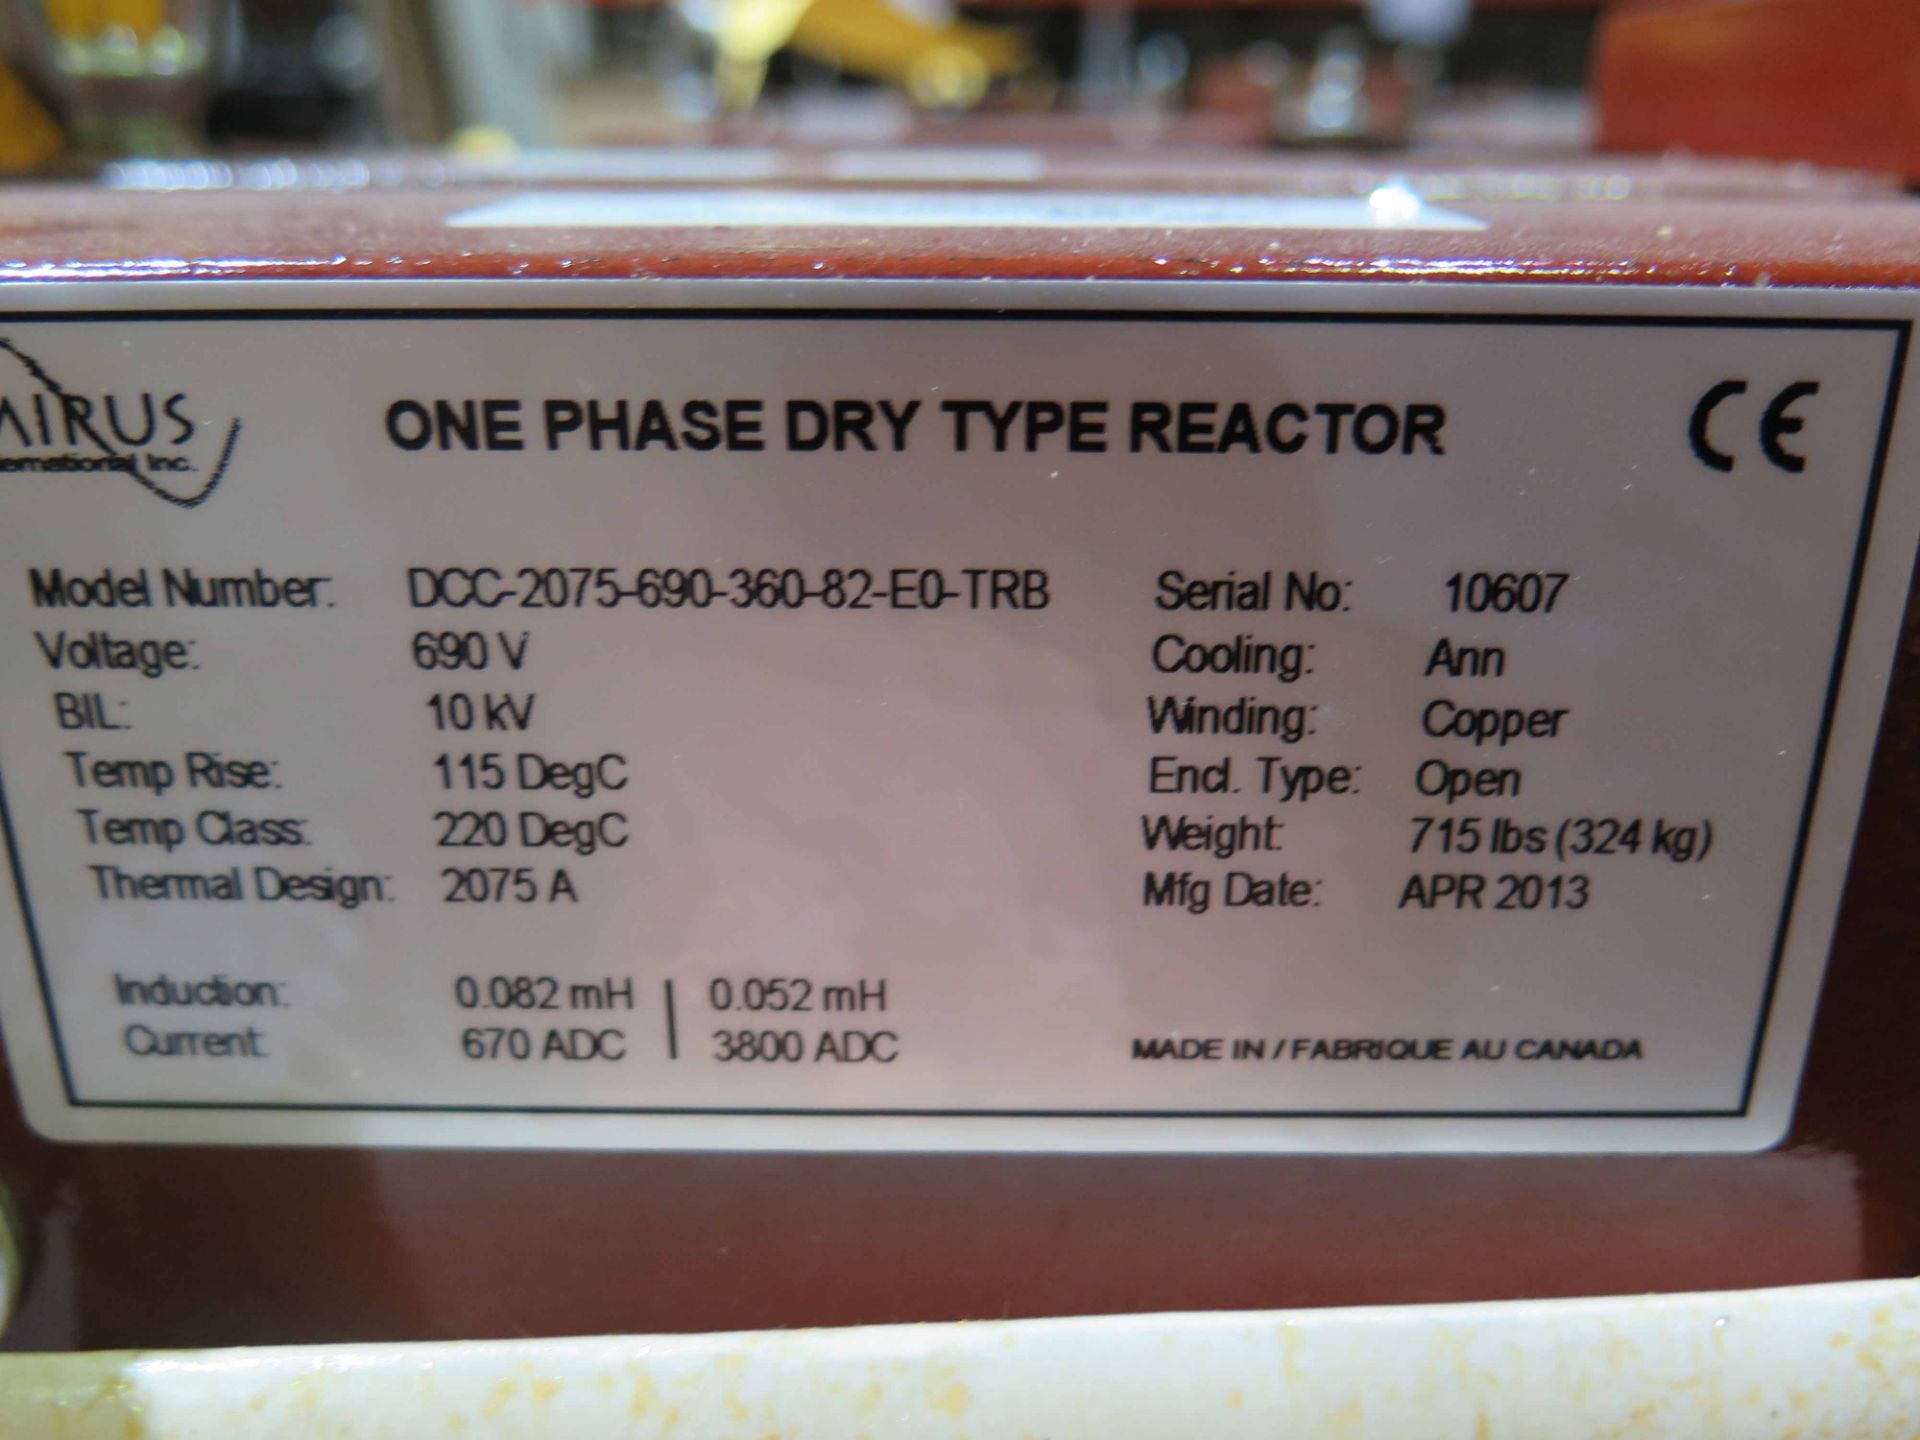 D.C. LINK REACTOR, MIRUS, 600 v., DCC-2075, 0.082mH, 1600A iron core reactor, 575V - Image 2 of 2